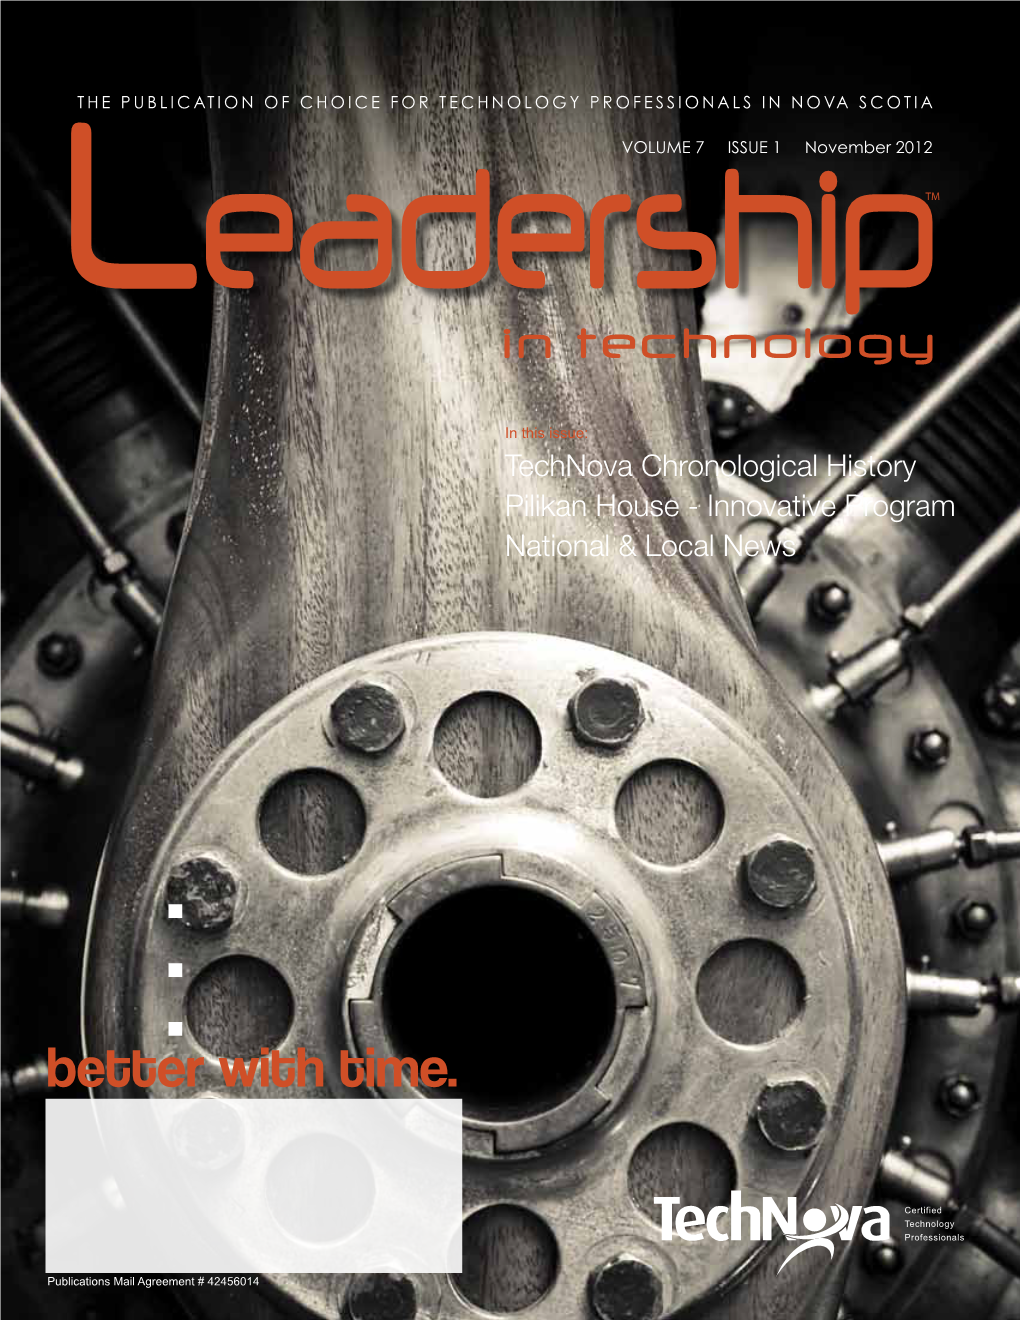 Volume 6. Issue 1. Fall 2012